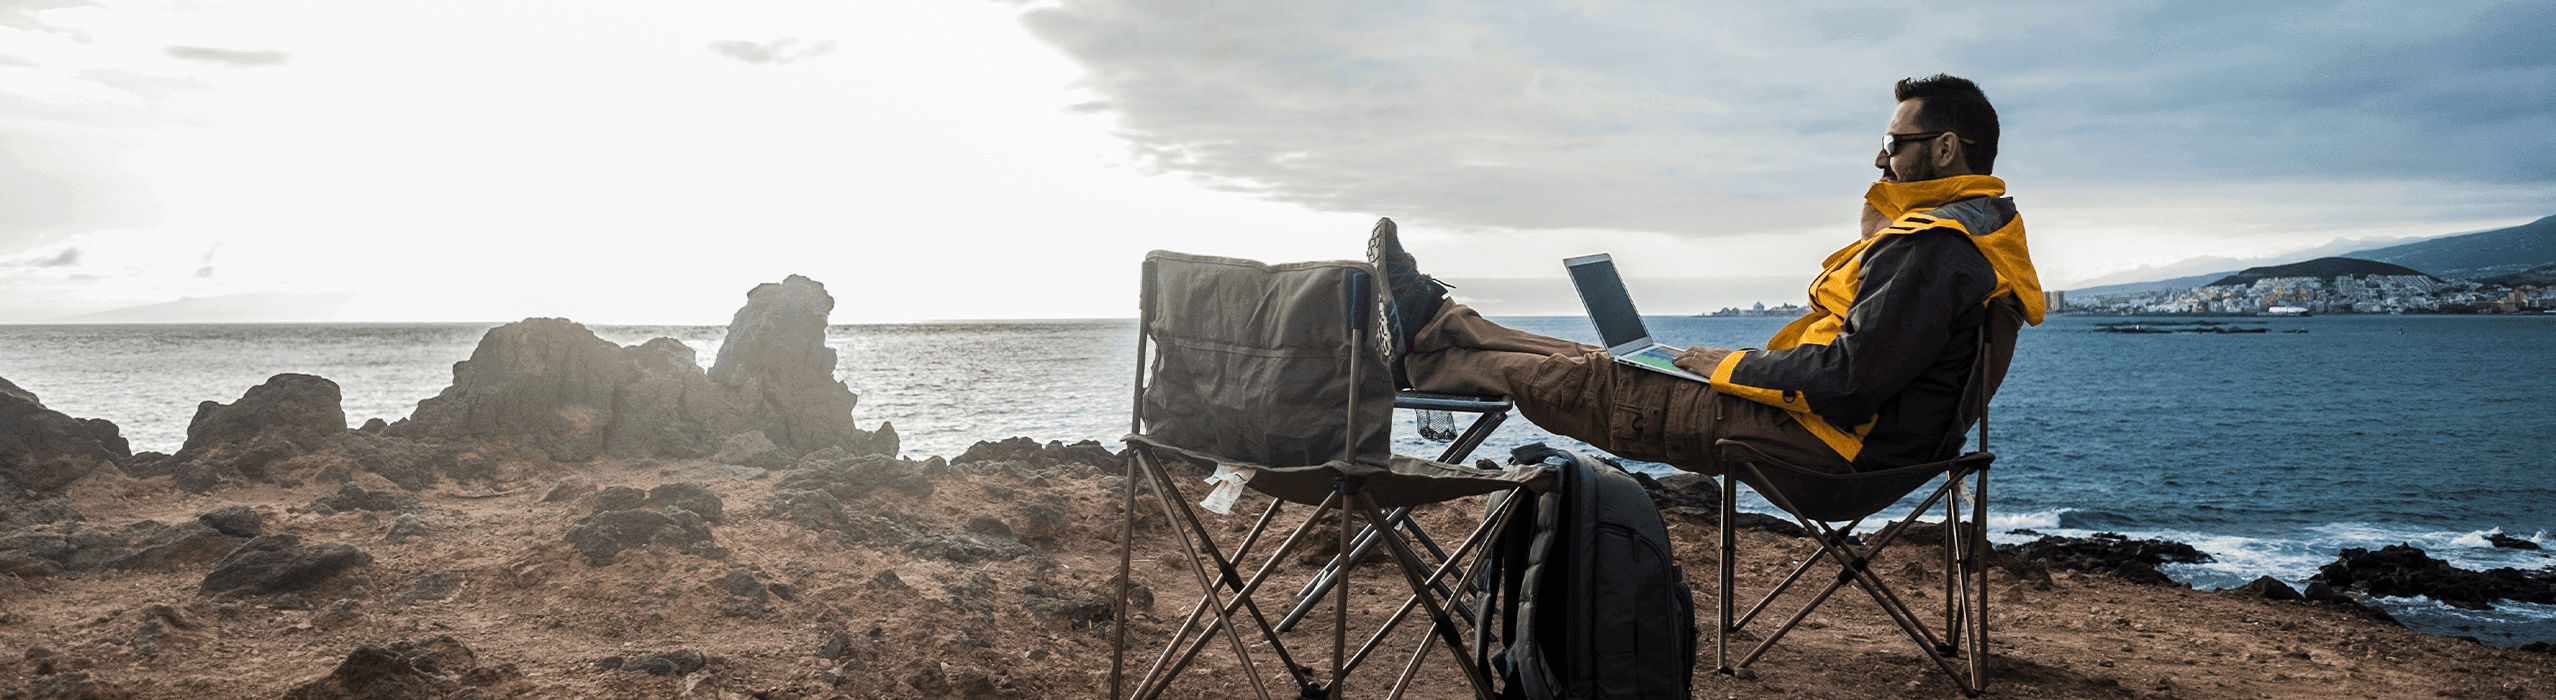 The How to become a digital nomad (and work remotely from anywhere!)'s article